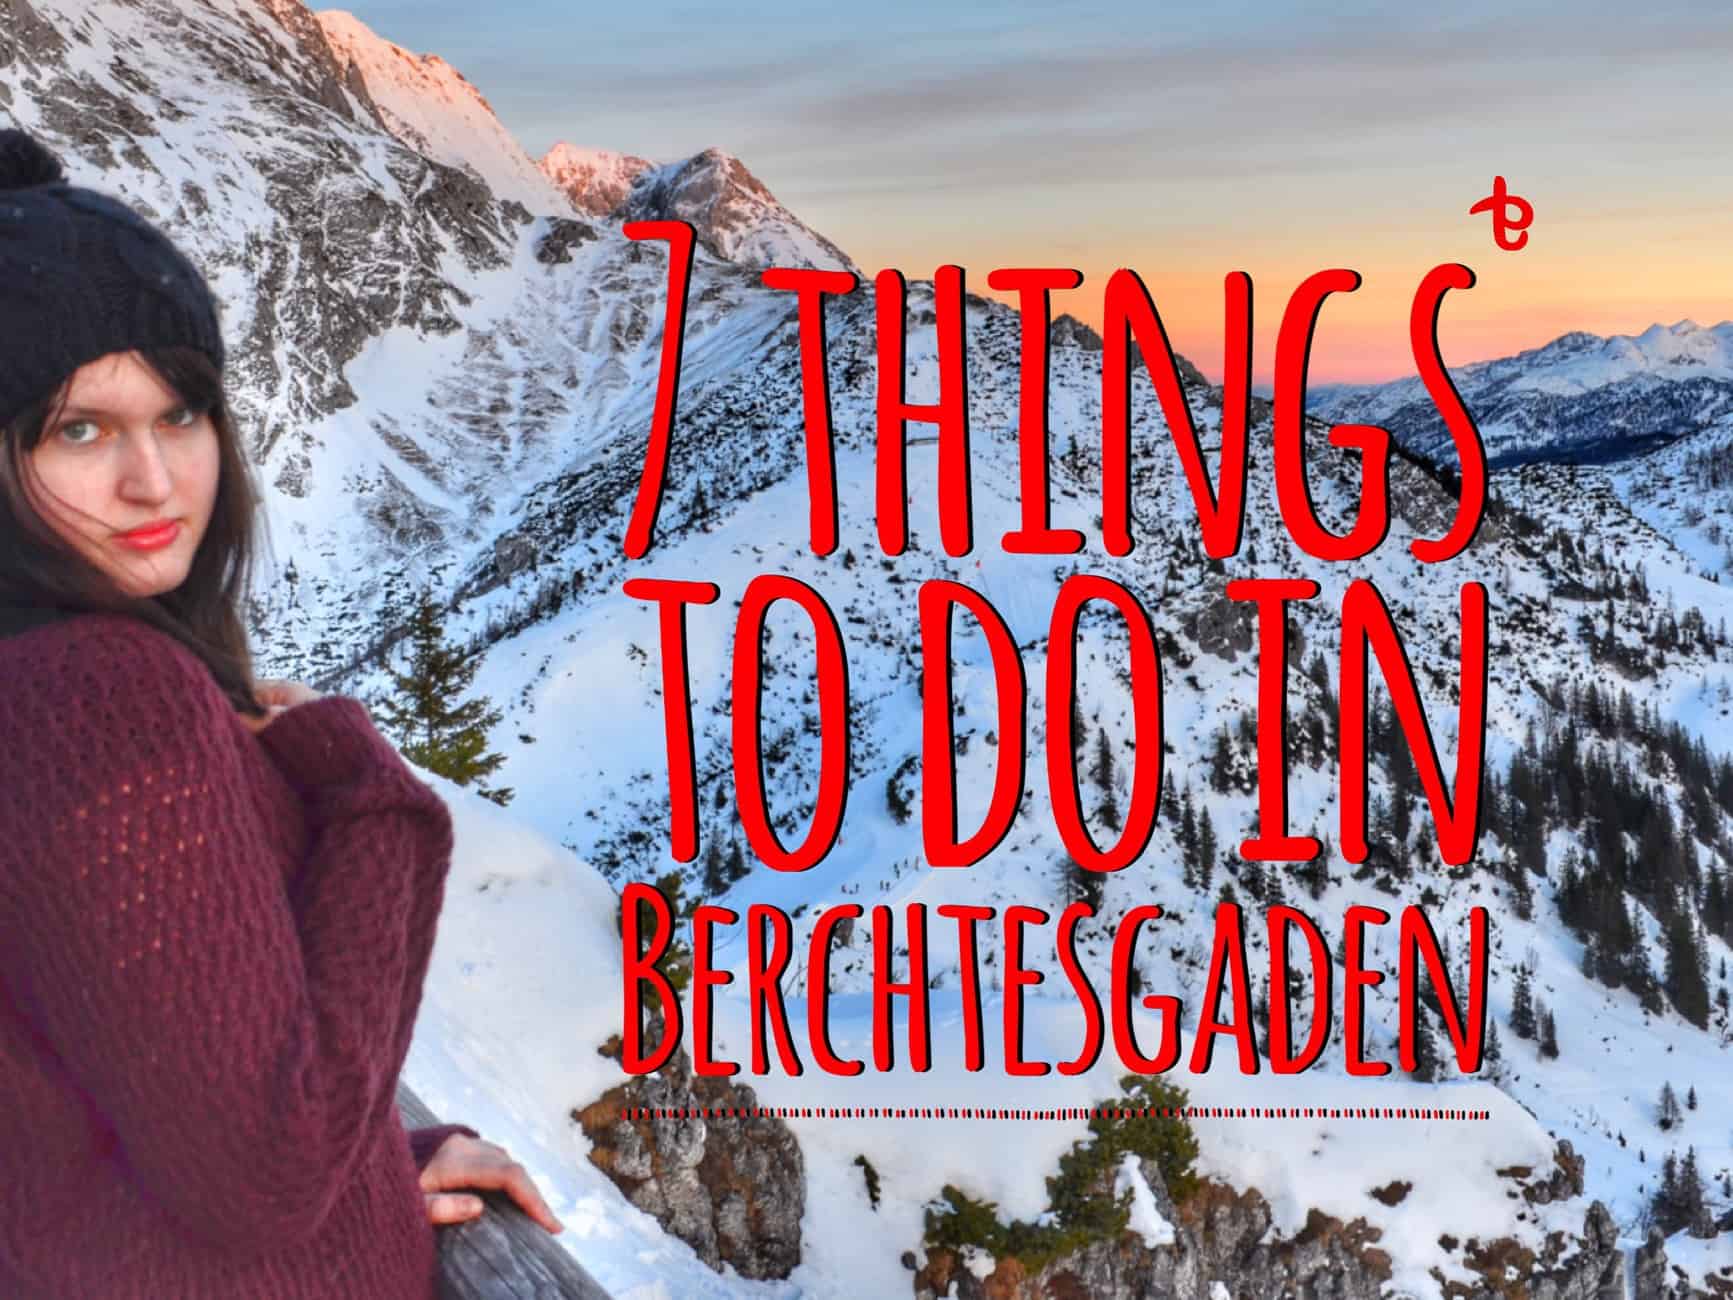 10 wonderful things to do in Berchtesgaden, Germany | The best of German Alps